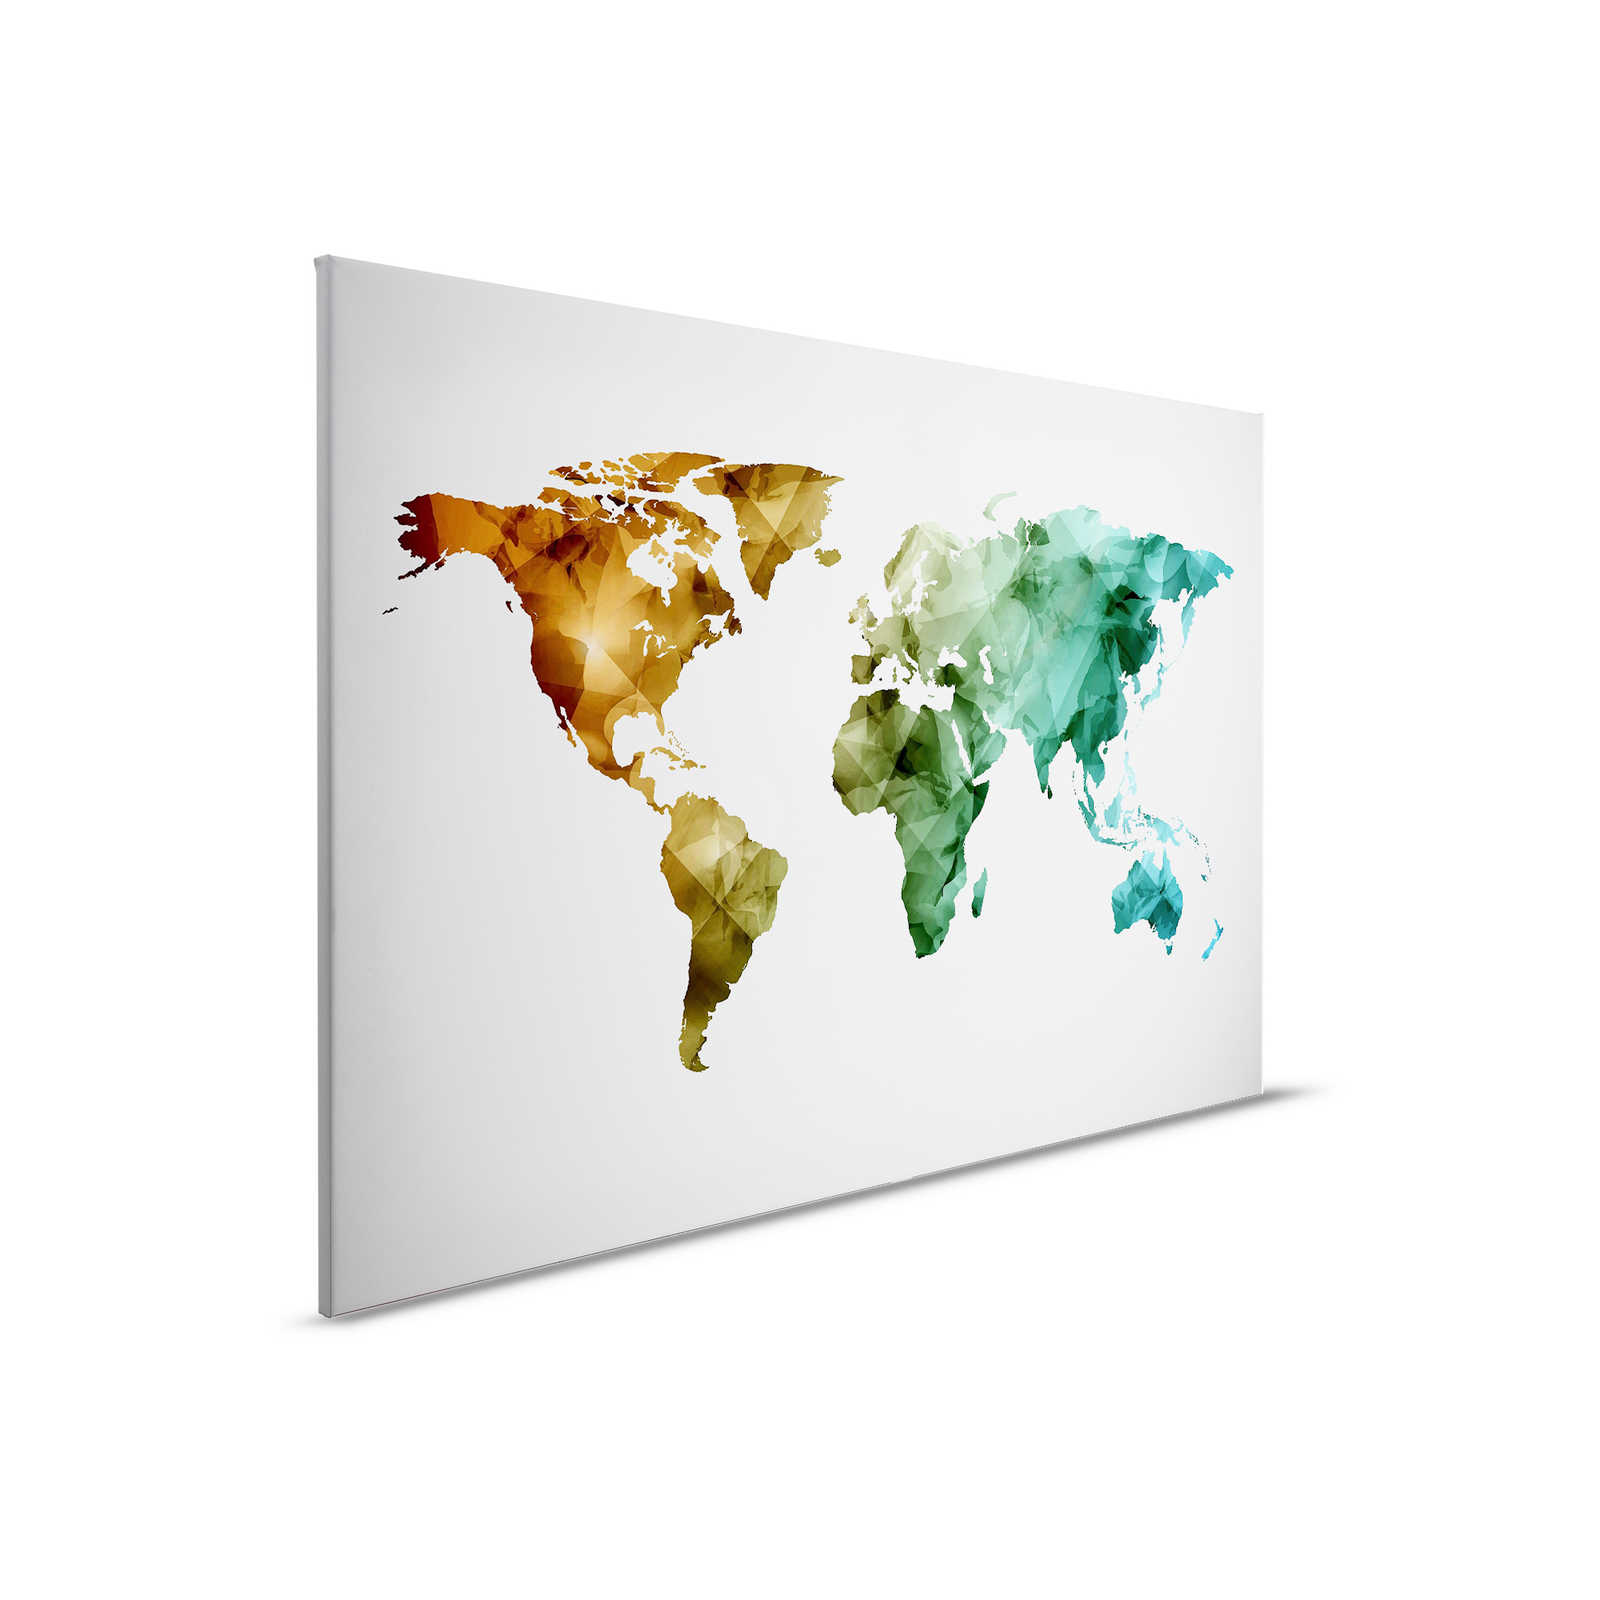         Canvas with world map made of graphic elements | WorldGrafic 1 - 0.90 m x 0.60 m
    